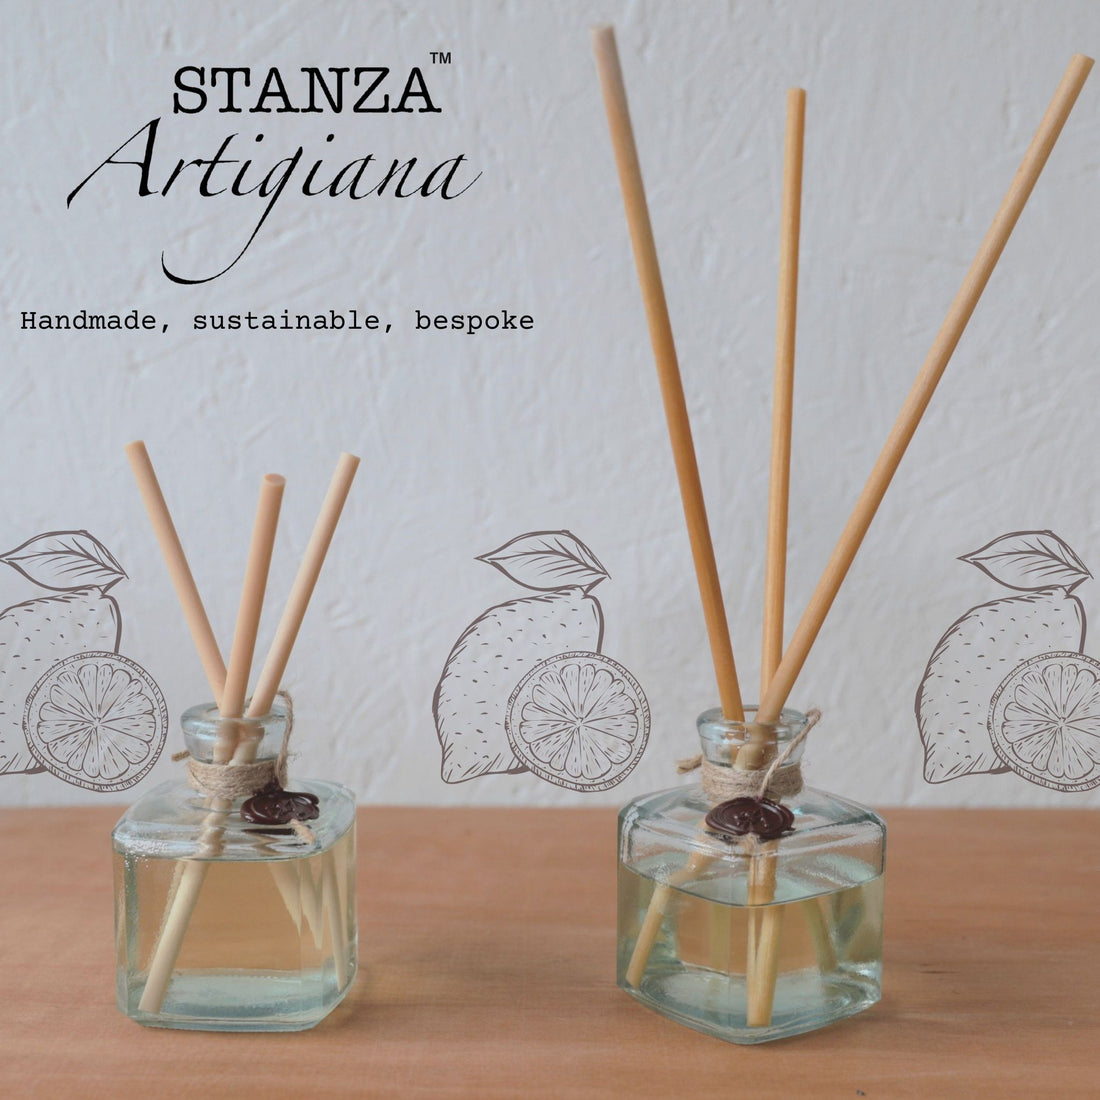 How to Use Reed Diffusers for Optimal Fragrance Experience? - STANZA Artigiana